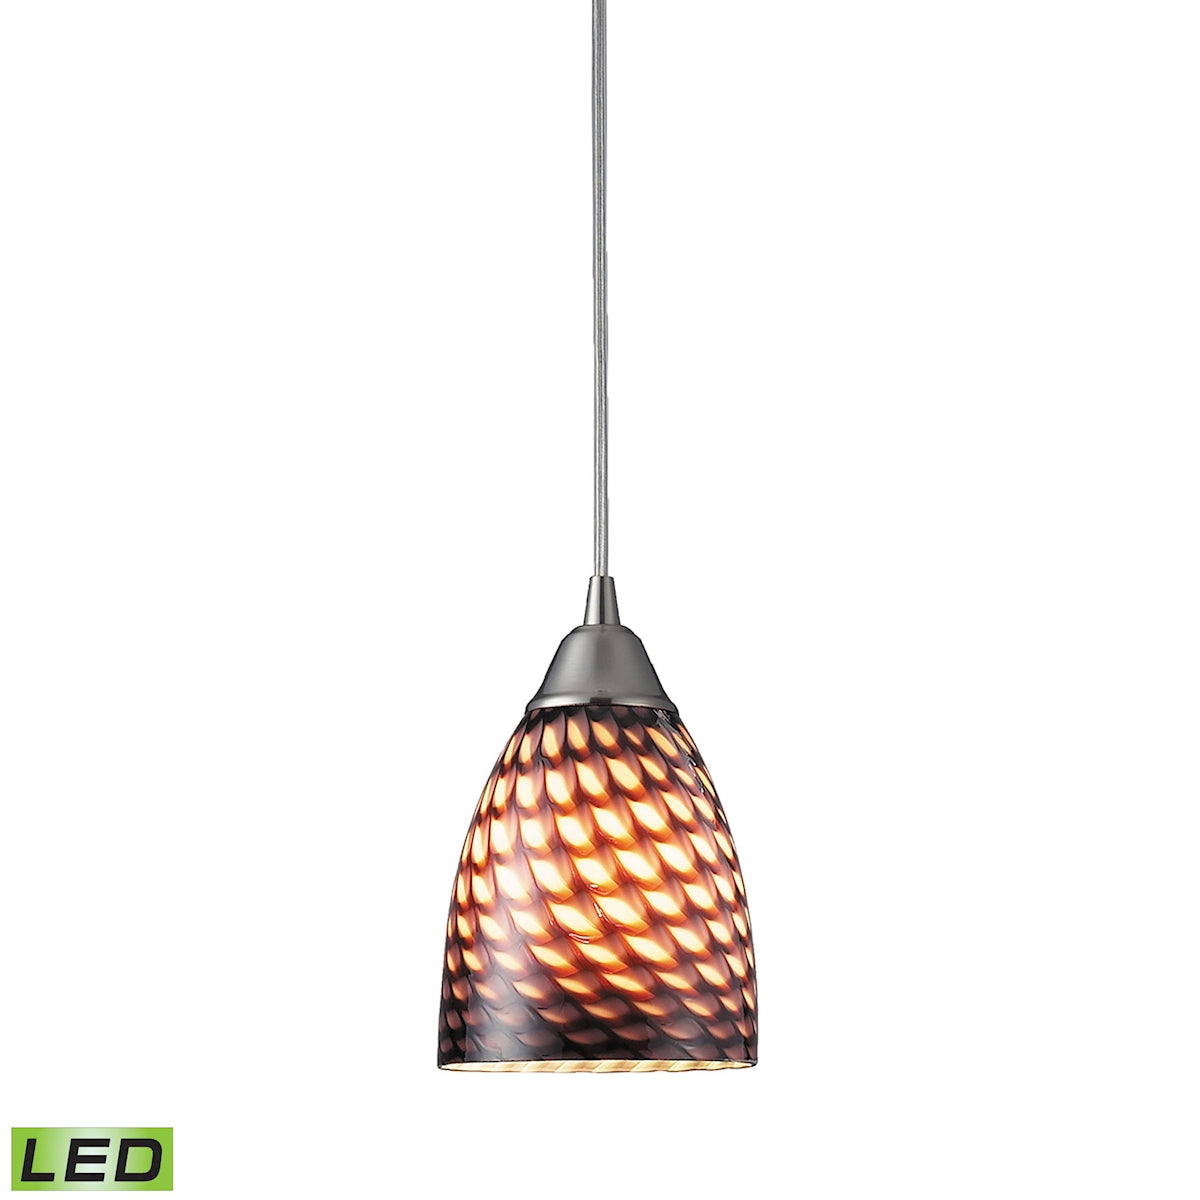 ELK Lighting 416-1C-LED Arco Baleno 1-Light Mini Pendant in Satin Nickel with Coco Glass - Includes LED Bulb